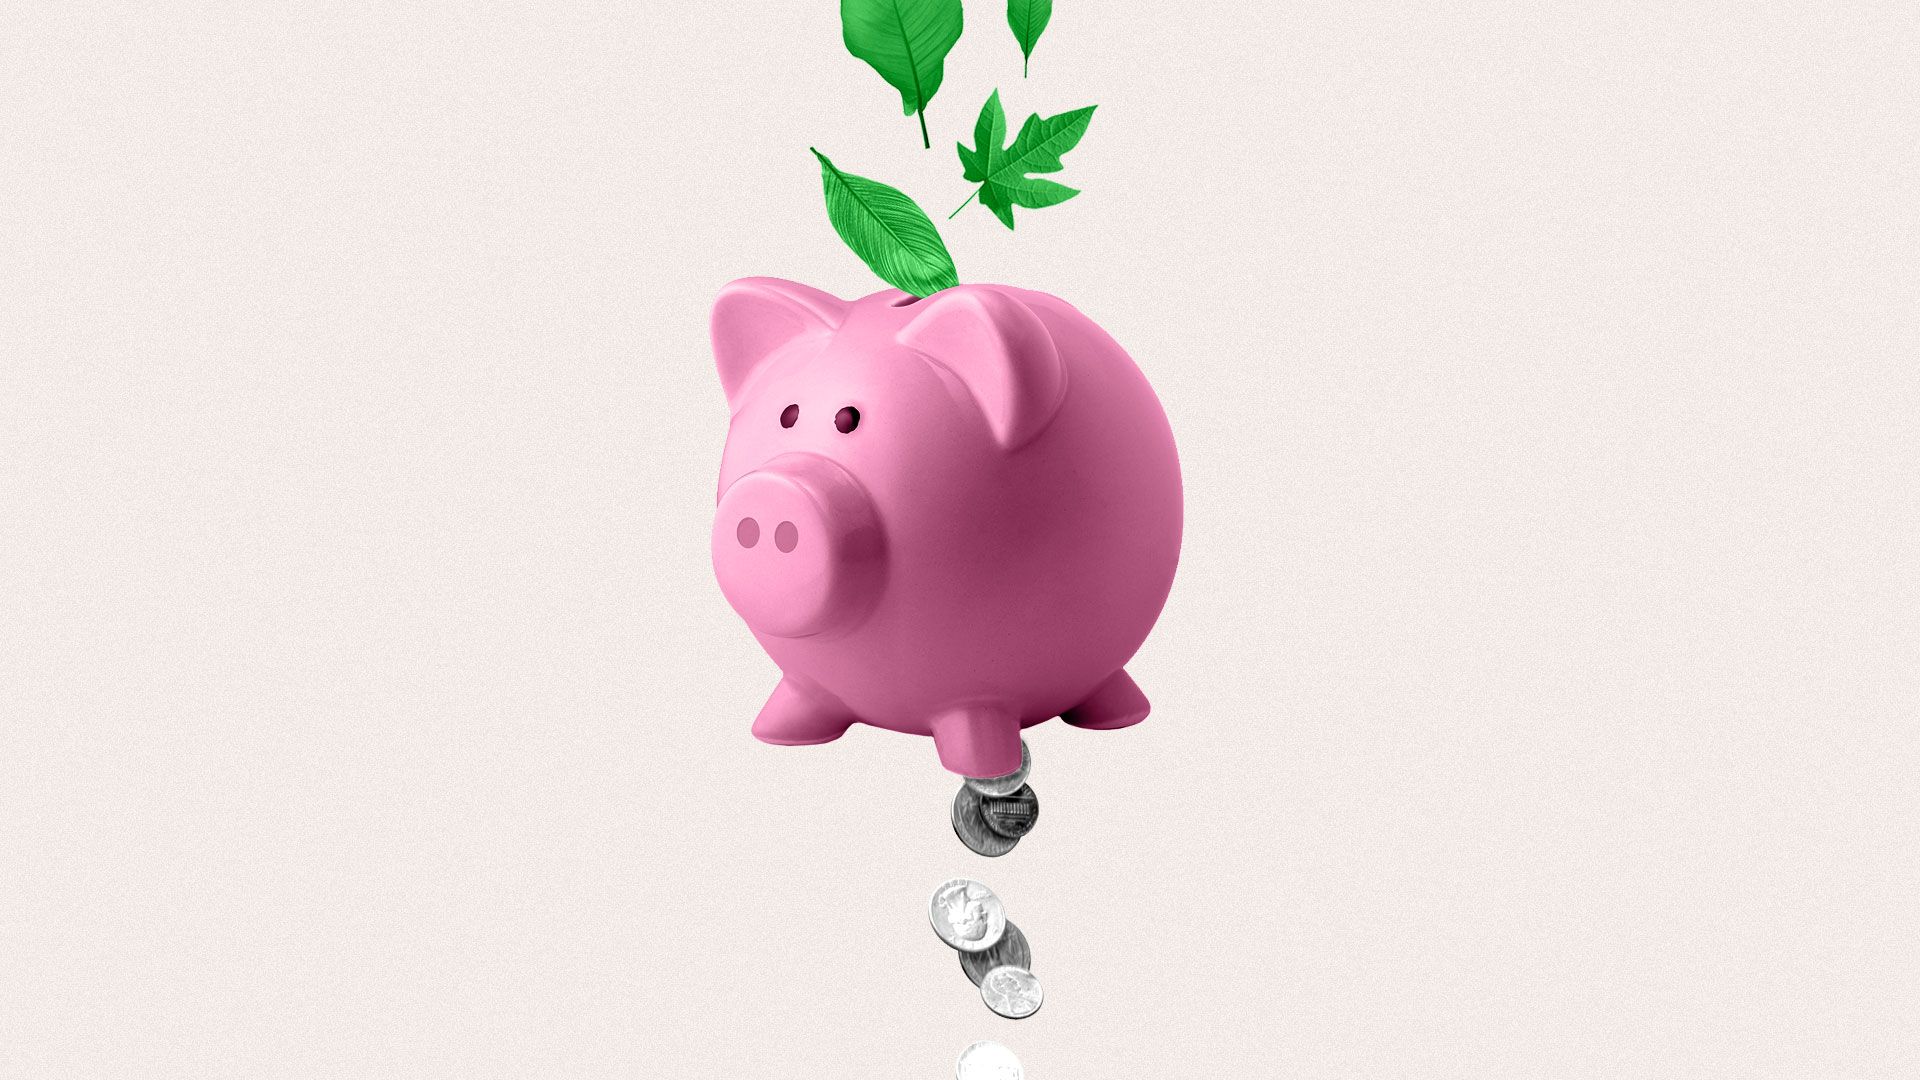  Illustration of a piggy bank with leaves coming in one end and coins falling out from the bottom.